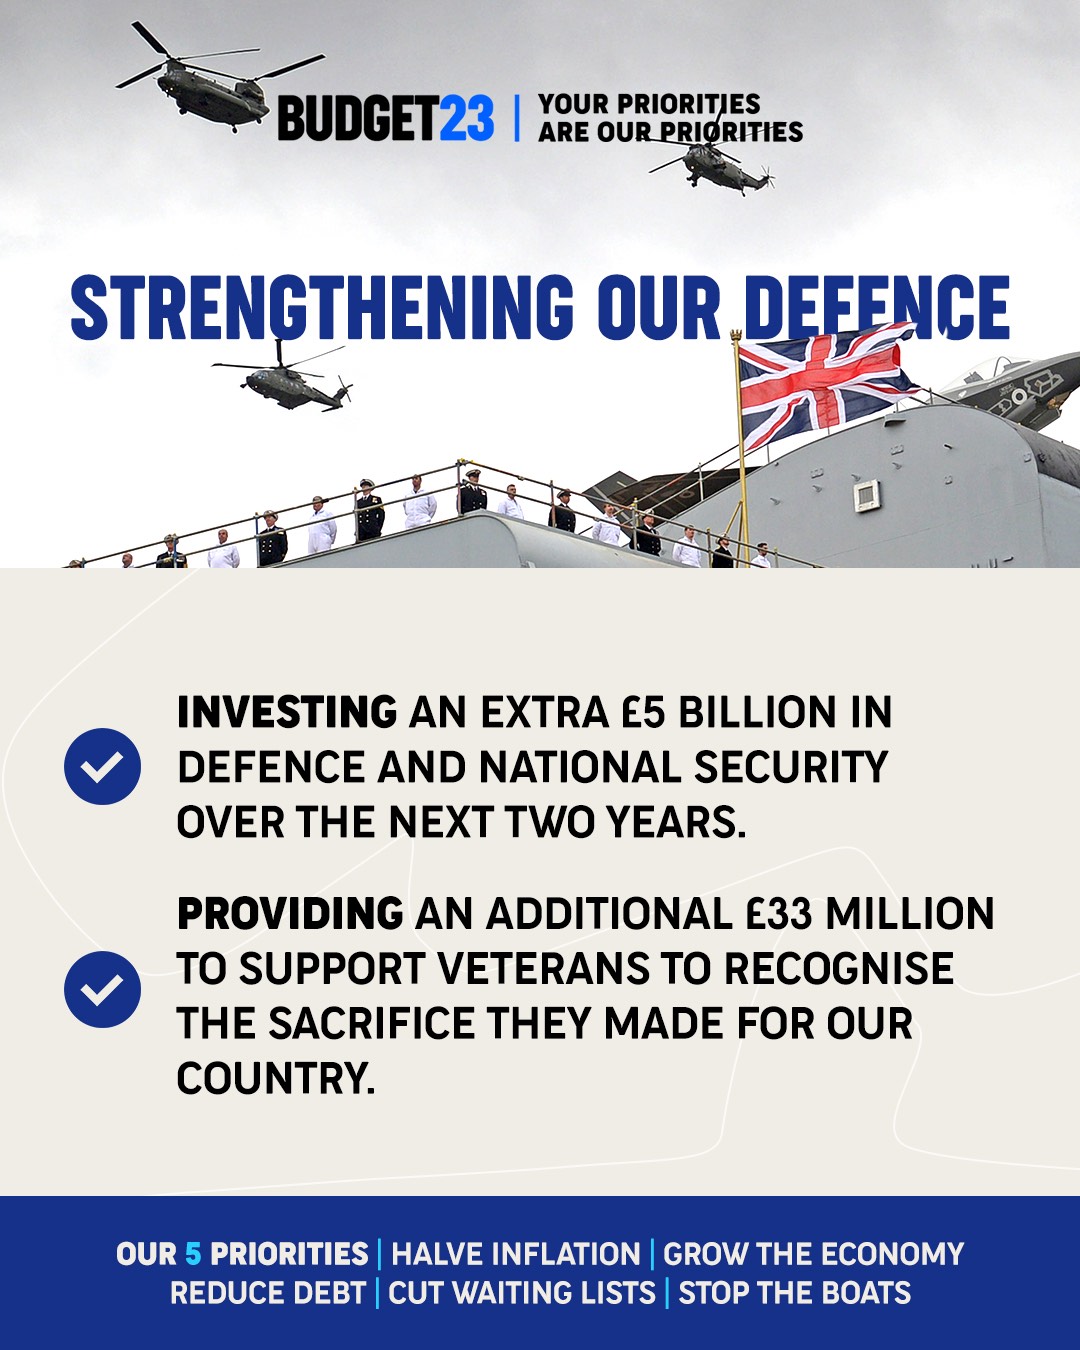 Strengthening our defence